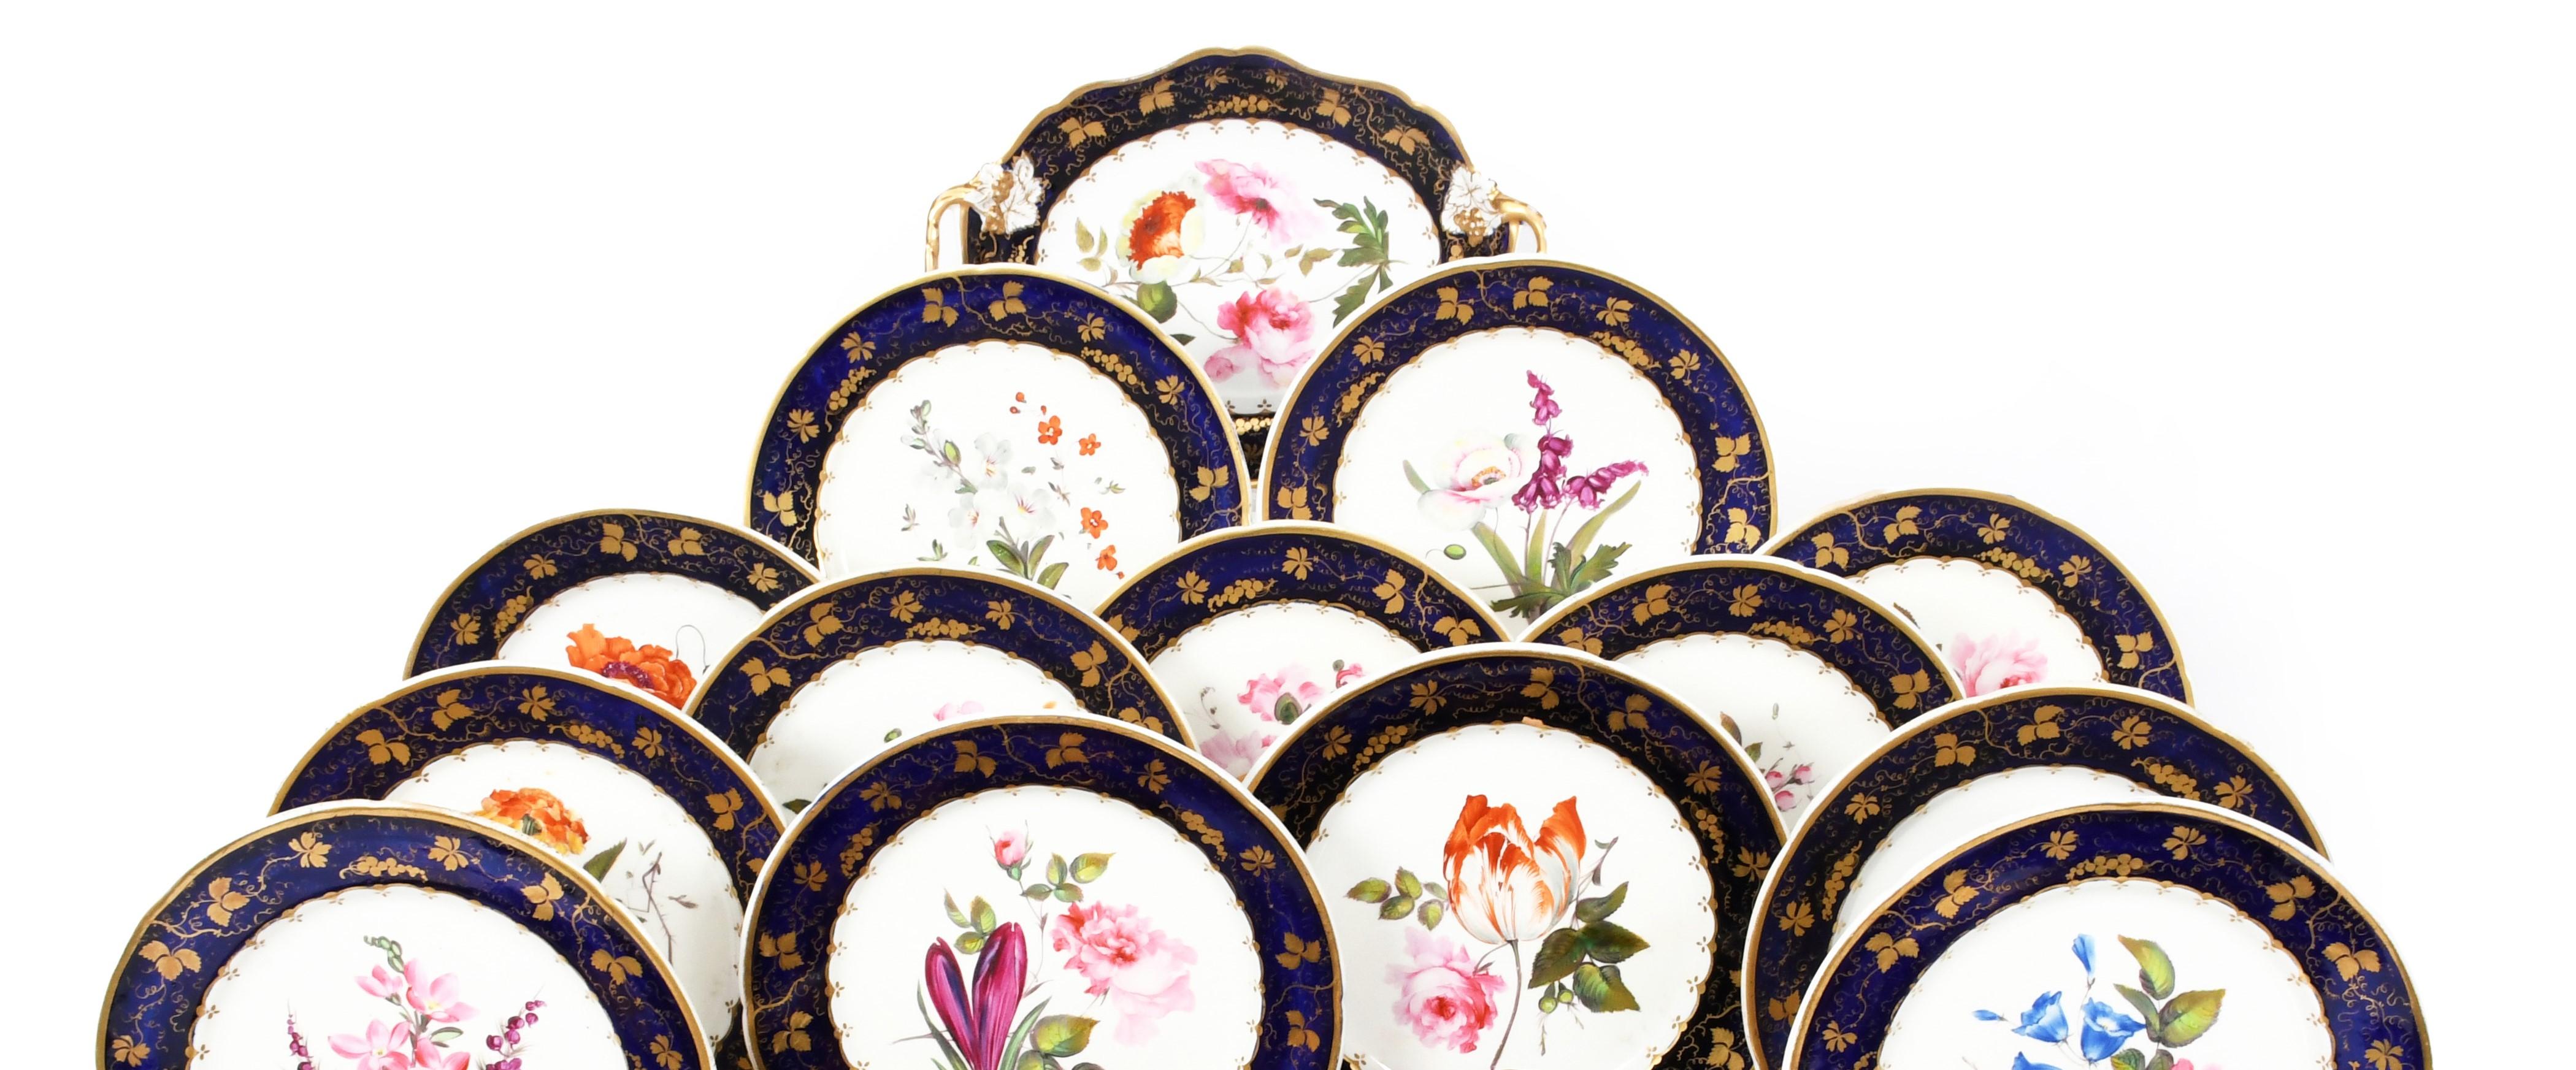 Derby  Porcelain Botanical Handpainted Dessert Service, C.1820 In Good Condition For Sale In London, GB